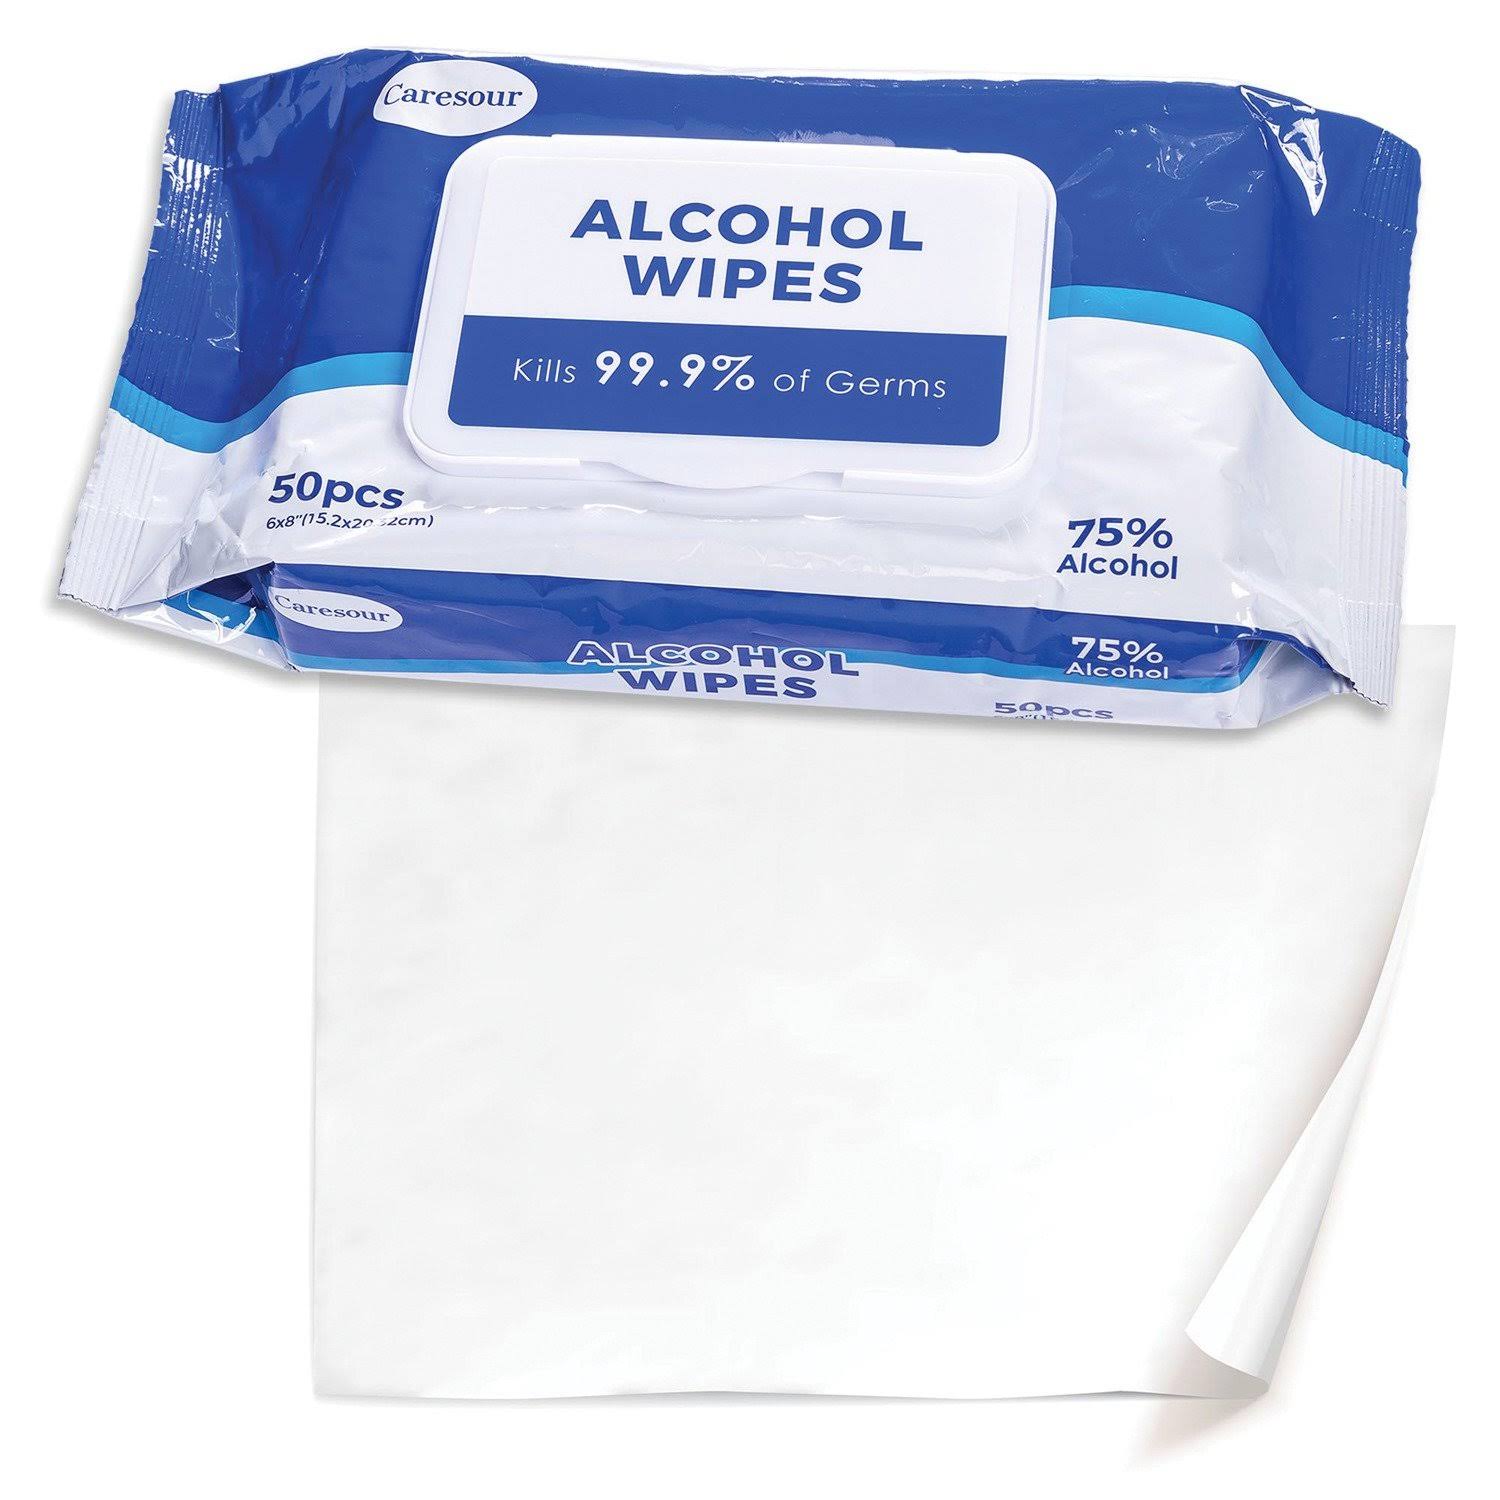 Caresour W-075 50pk 75% ALC Dsnfctng Original WPS 75% Alcohol Disinfecting Wipes 50 Pack